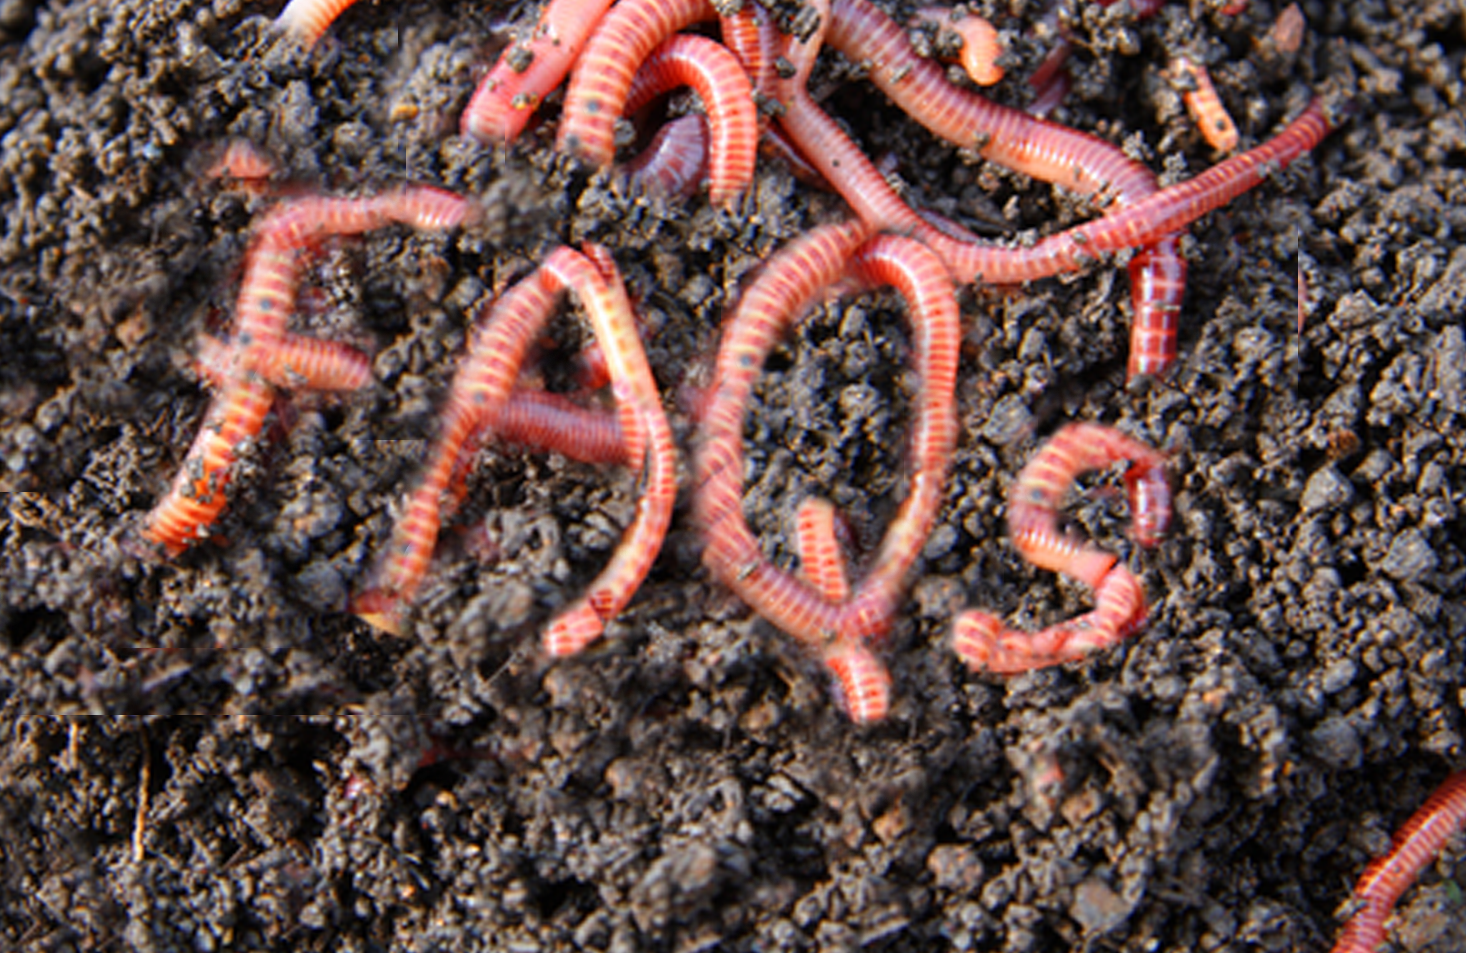 51 Composting Red Wiggler Worms Also Great For Pet Food. 